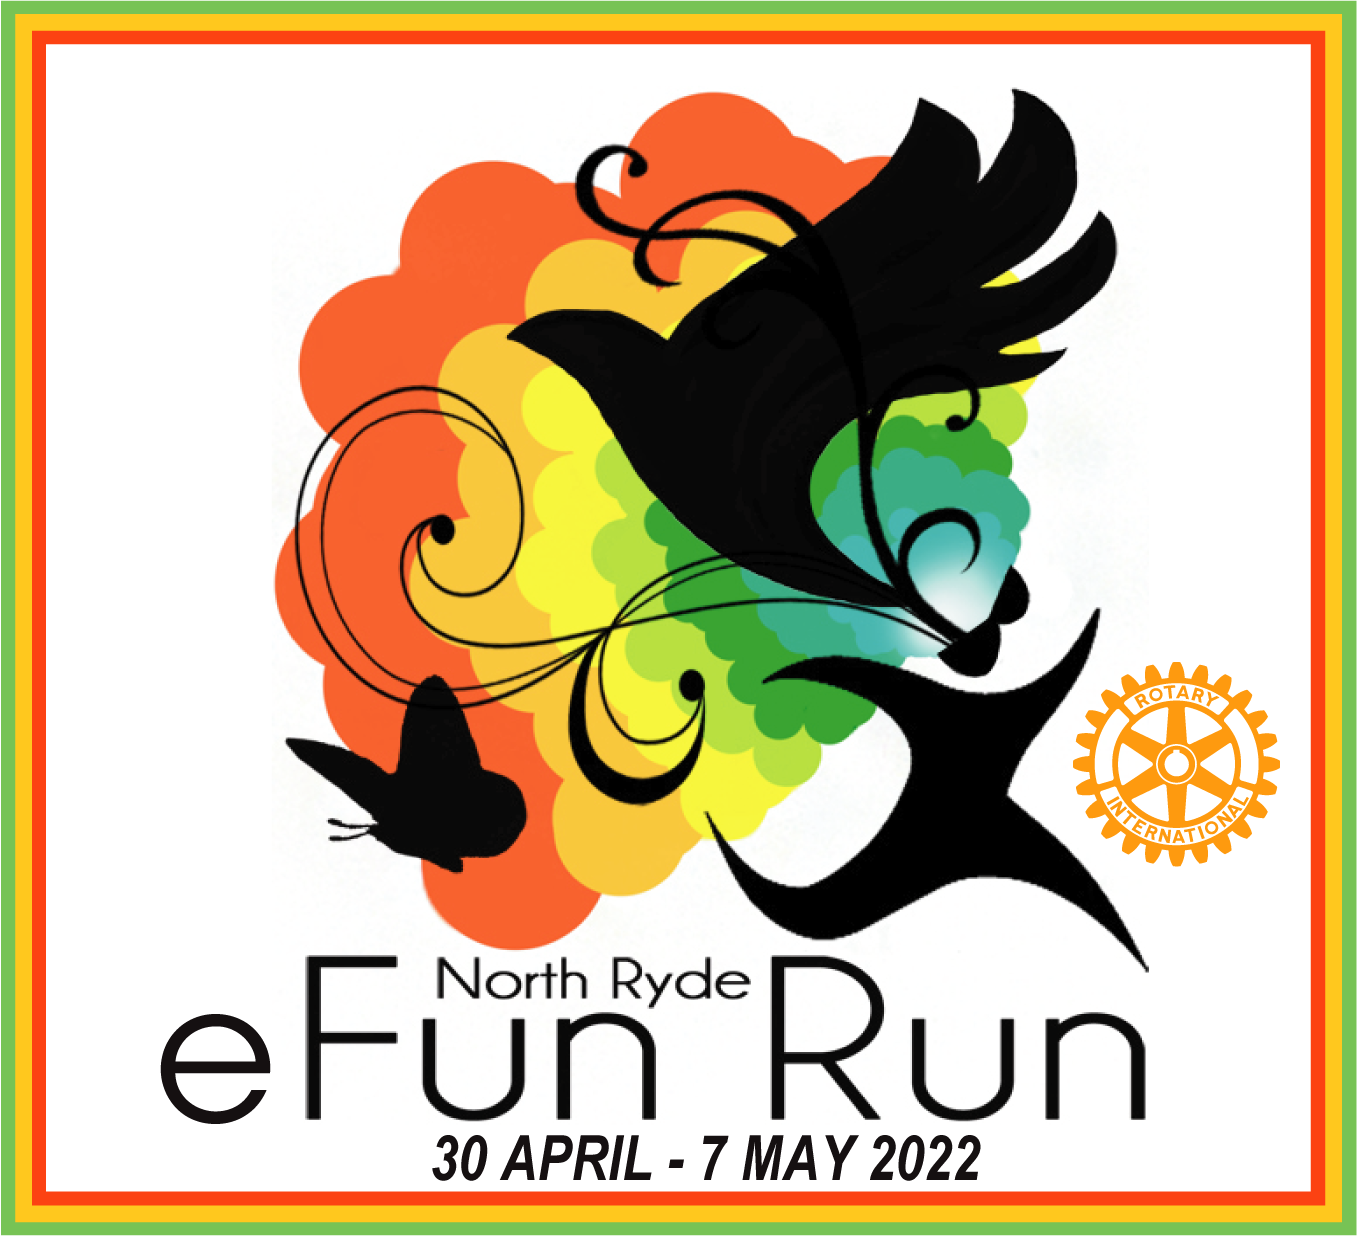 The 2023 North Ryde eFun Run for Youth Mental Health